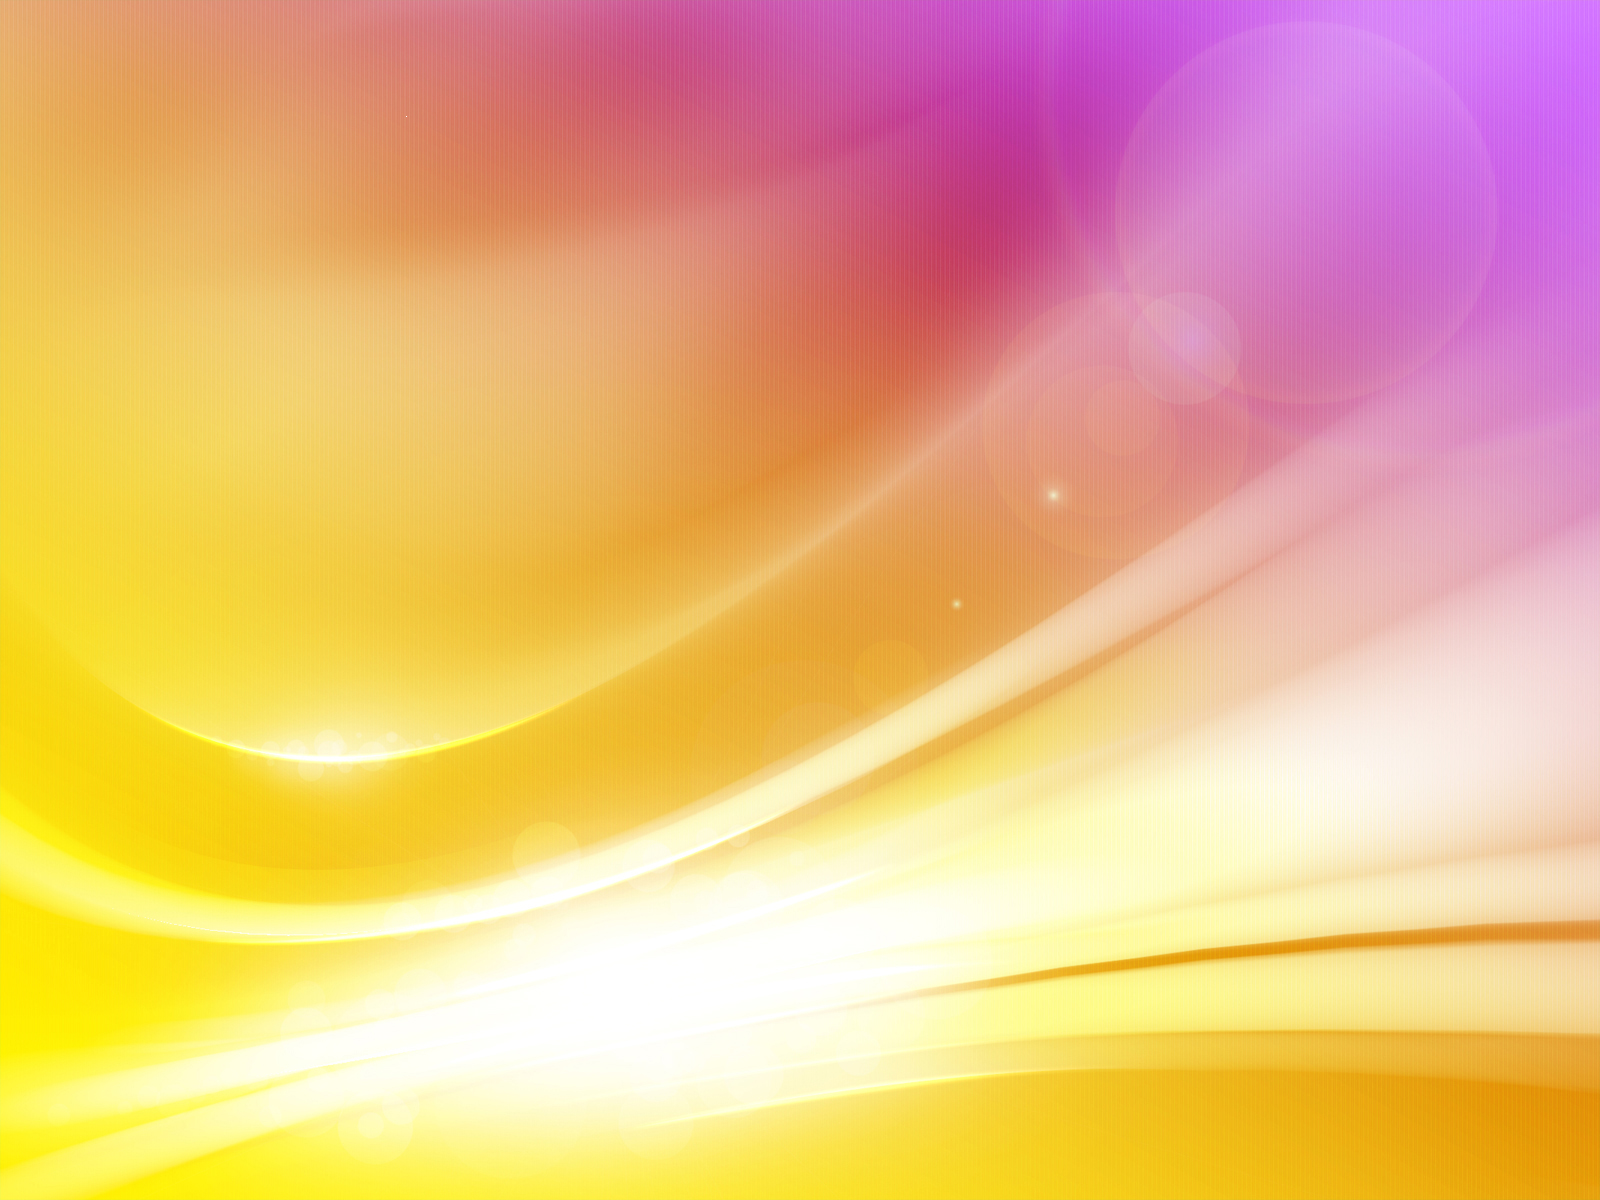   Purple and yellow wallpaper   Amazing Yellow And Purple Colors HD